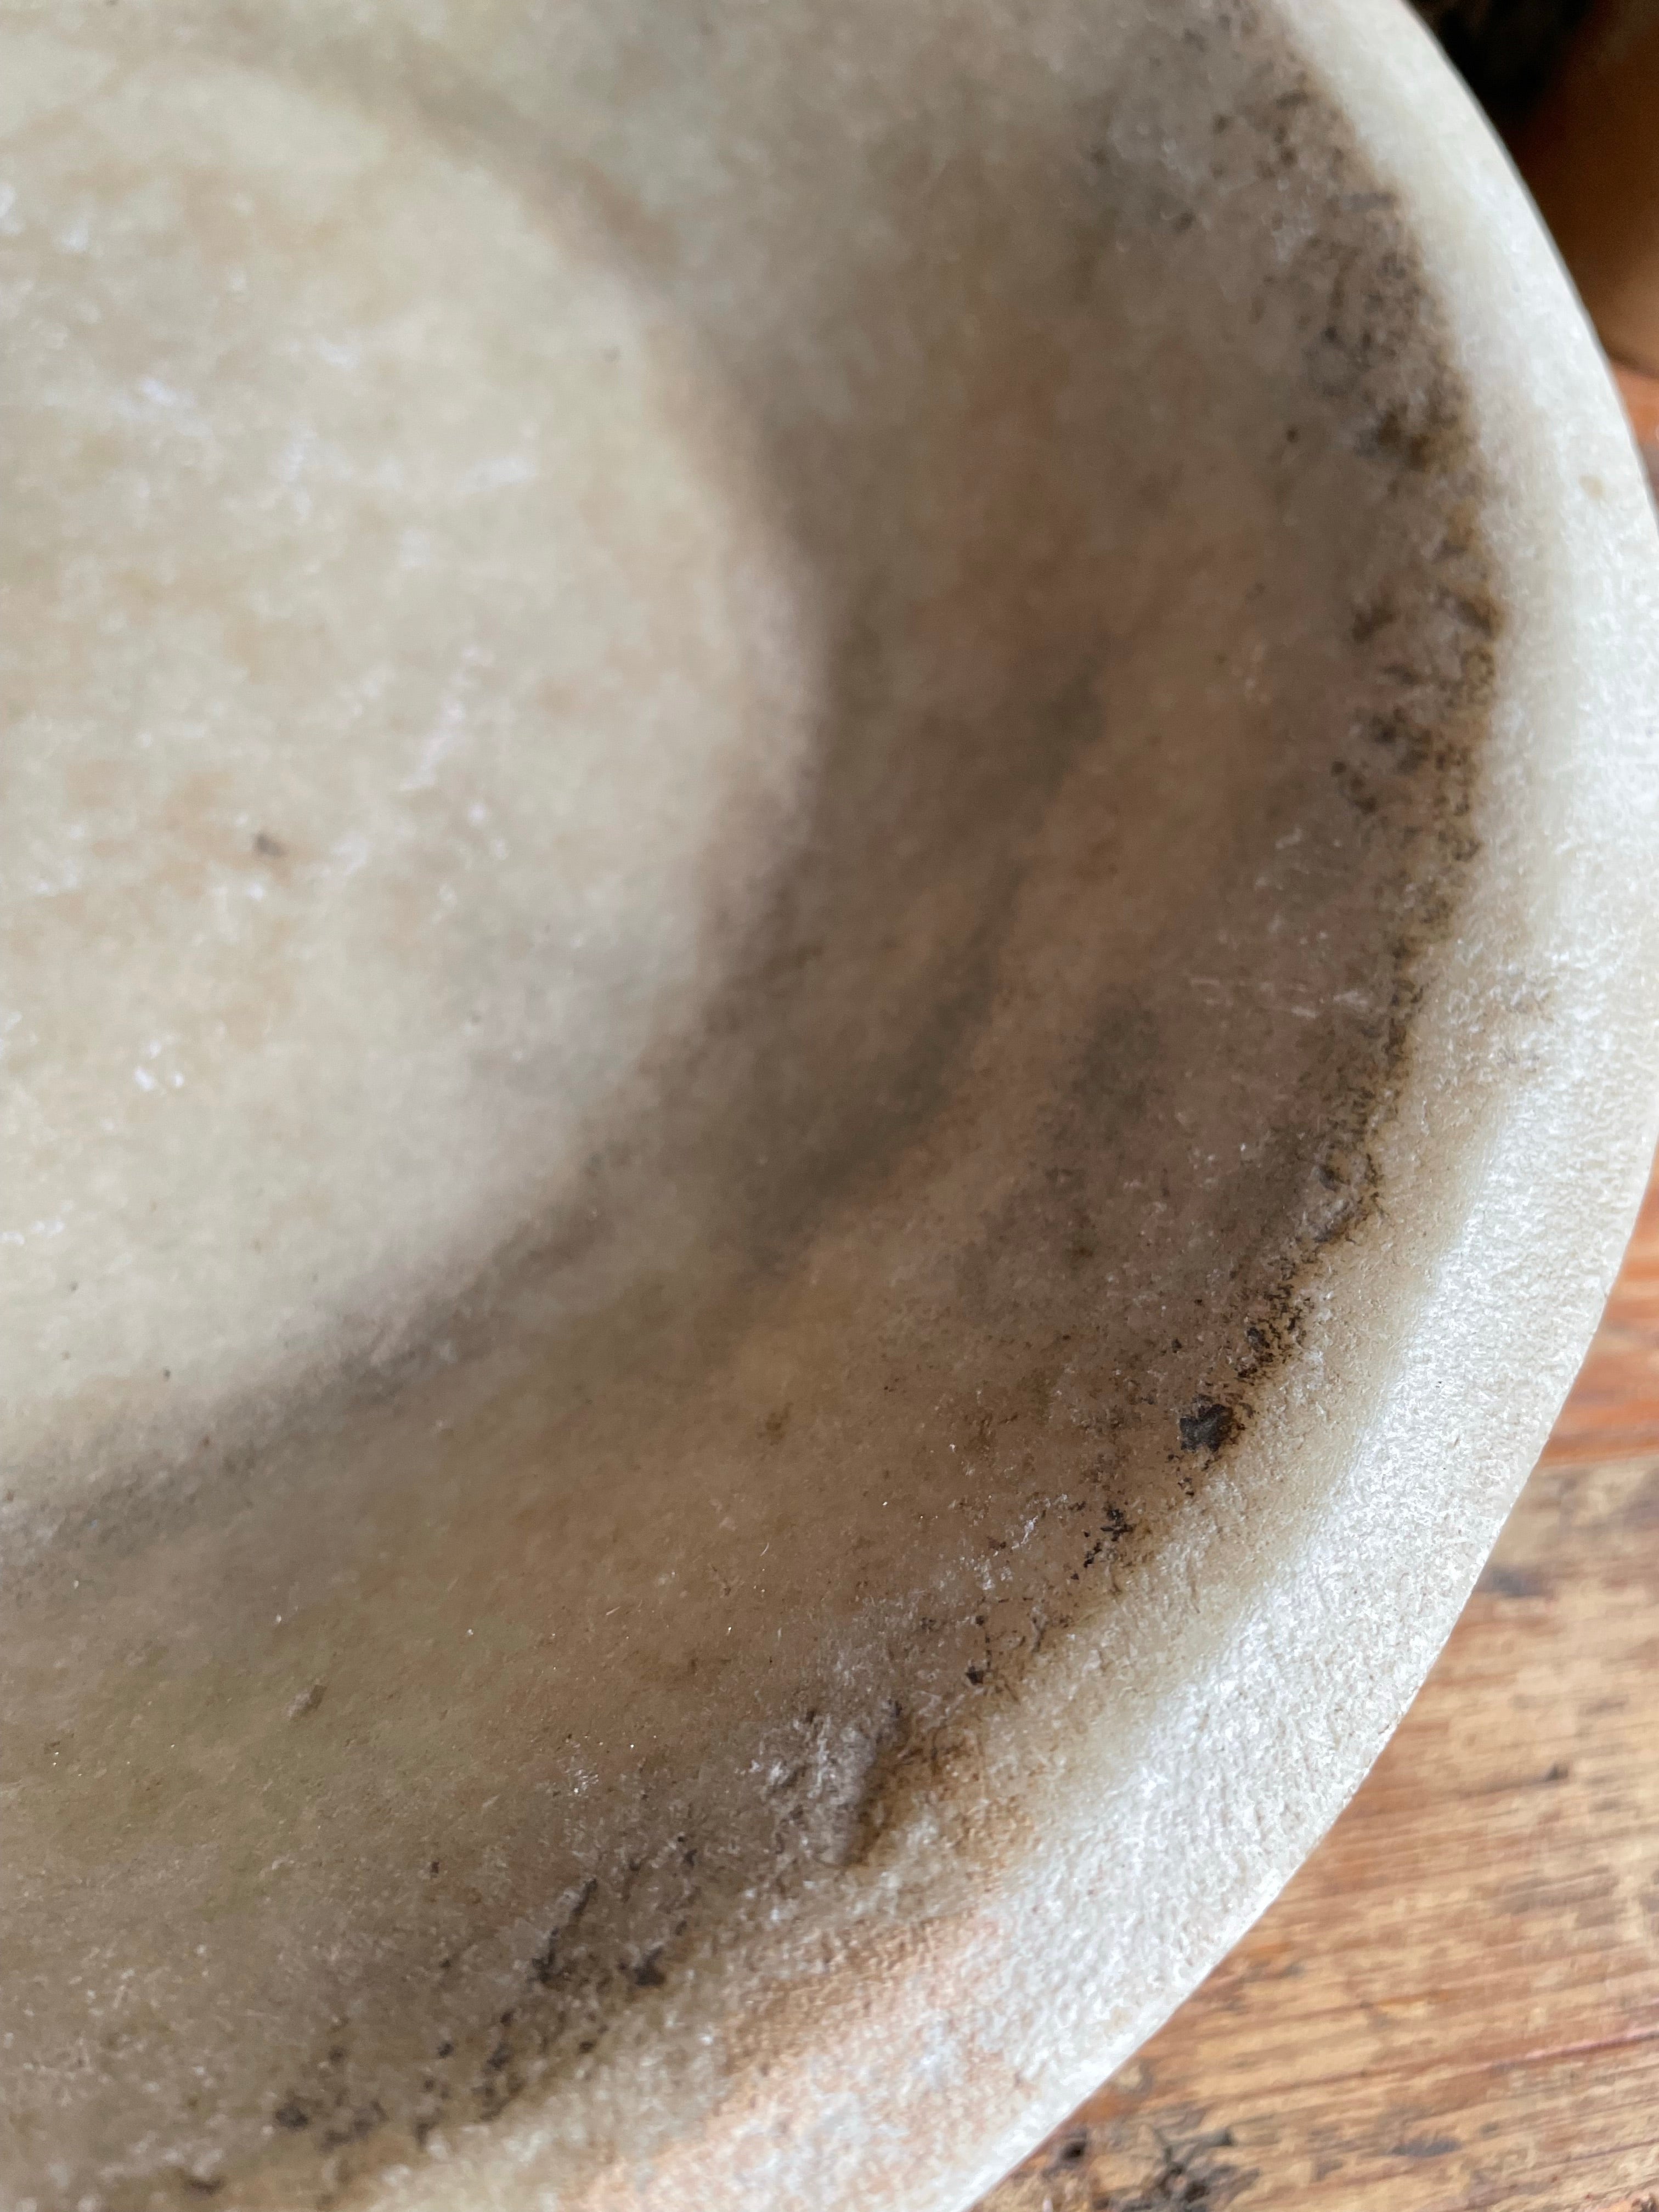 Antique Marble Stone Bowl: Beige Hues